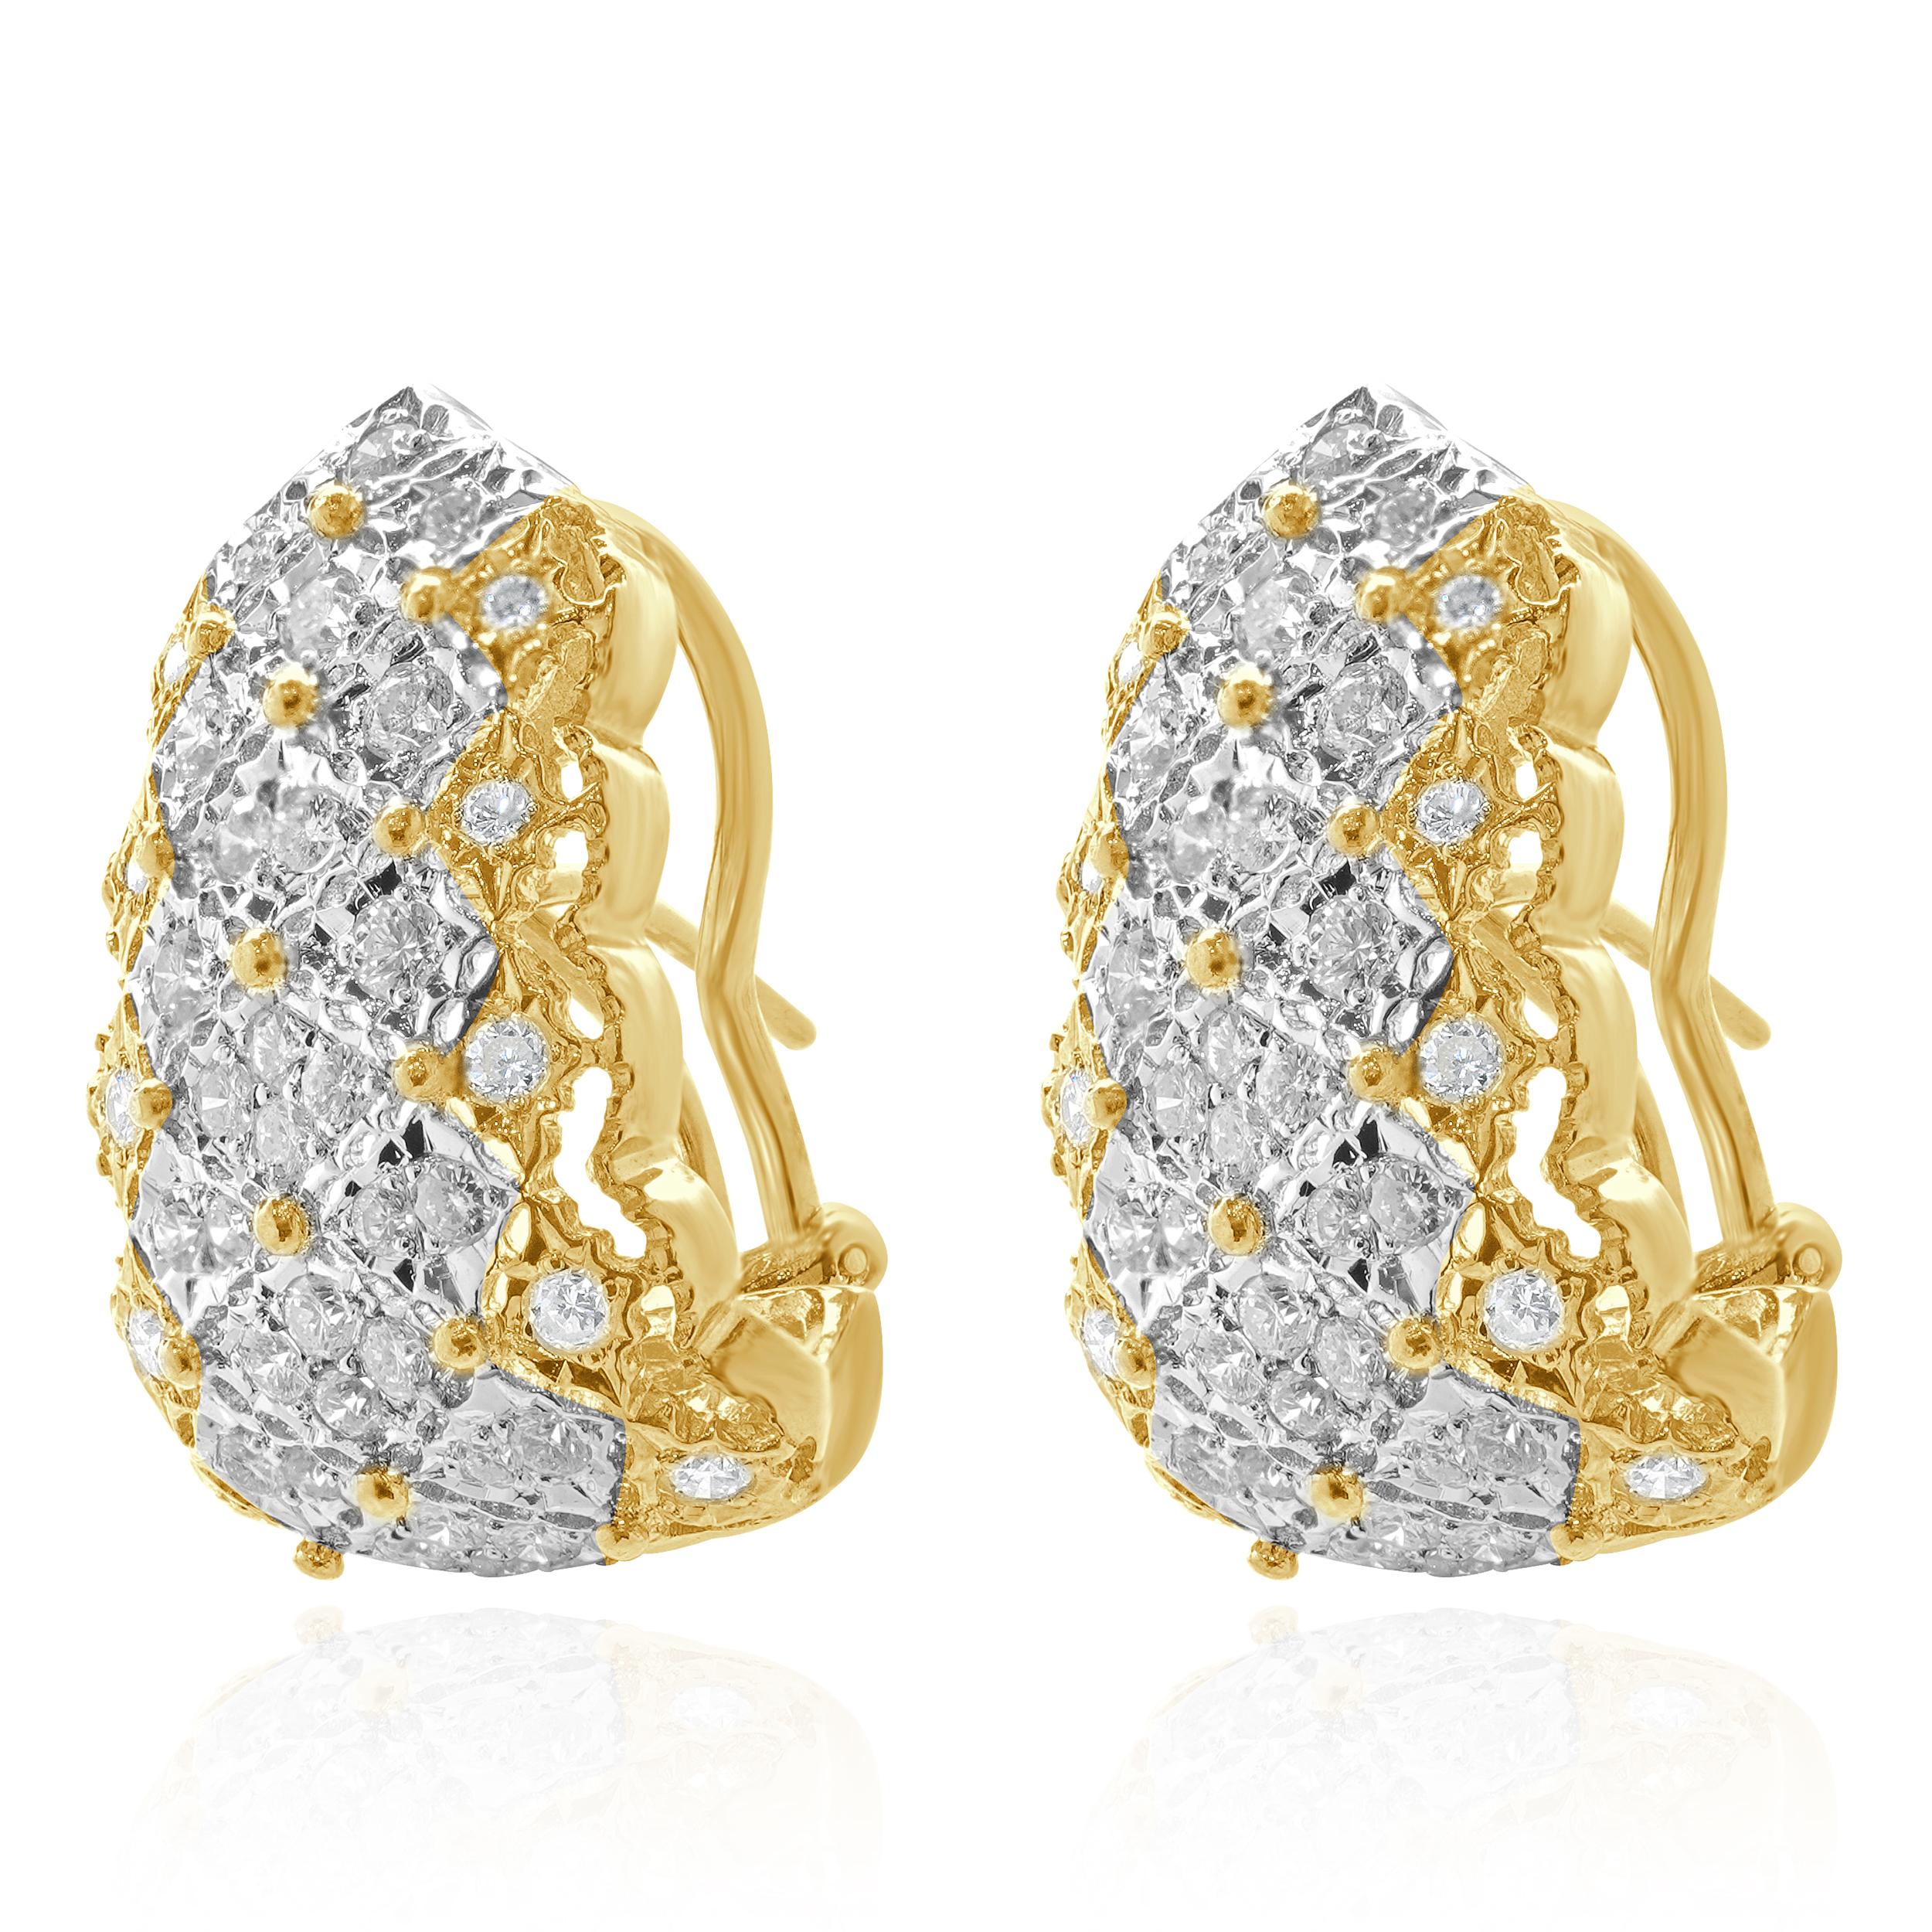 Designer: custom design
Material: 18K white & yellow gold
Diamonds: 80 round brilliant cut = 1.60cttw
Color: G
Clarity: VS2-SI1
Dimensions: earrings measure 26 x 17.5mm in length
Weight: 16.23 grams